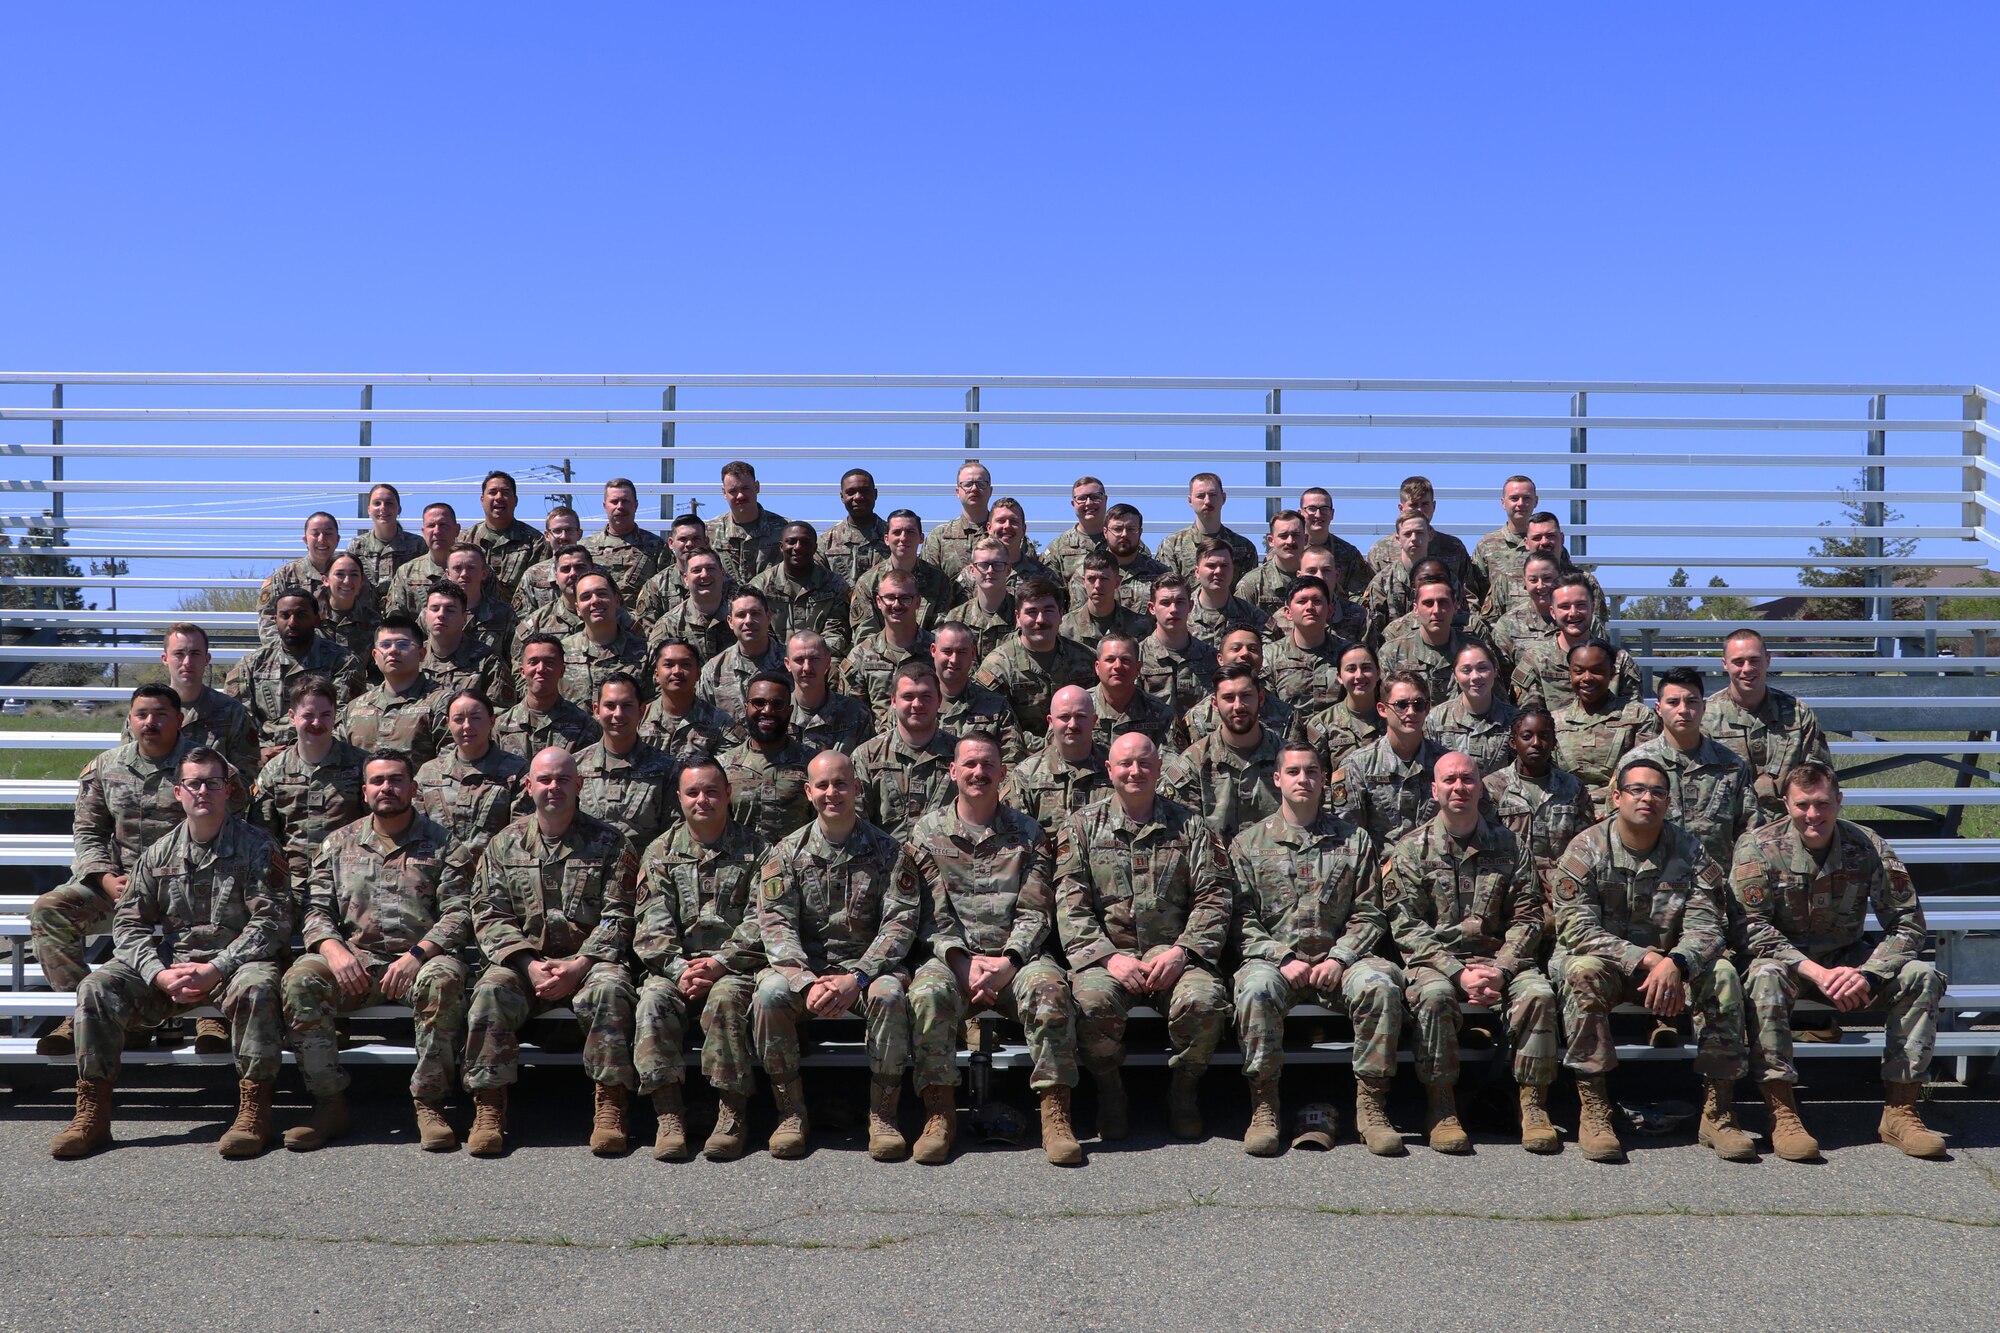 U.S. Air Force Combat Ammunition Planning and Production Course Class 23-05 pose for a group photo April 20, 2023, at Beale Air Force Base, California.